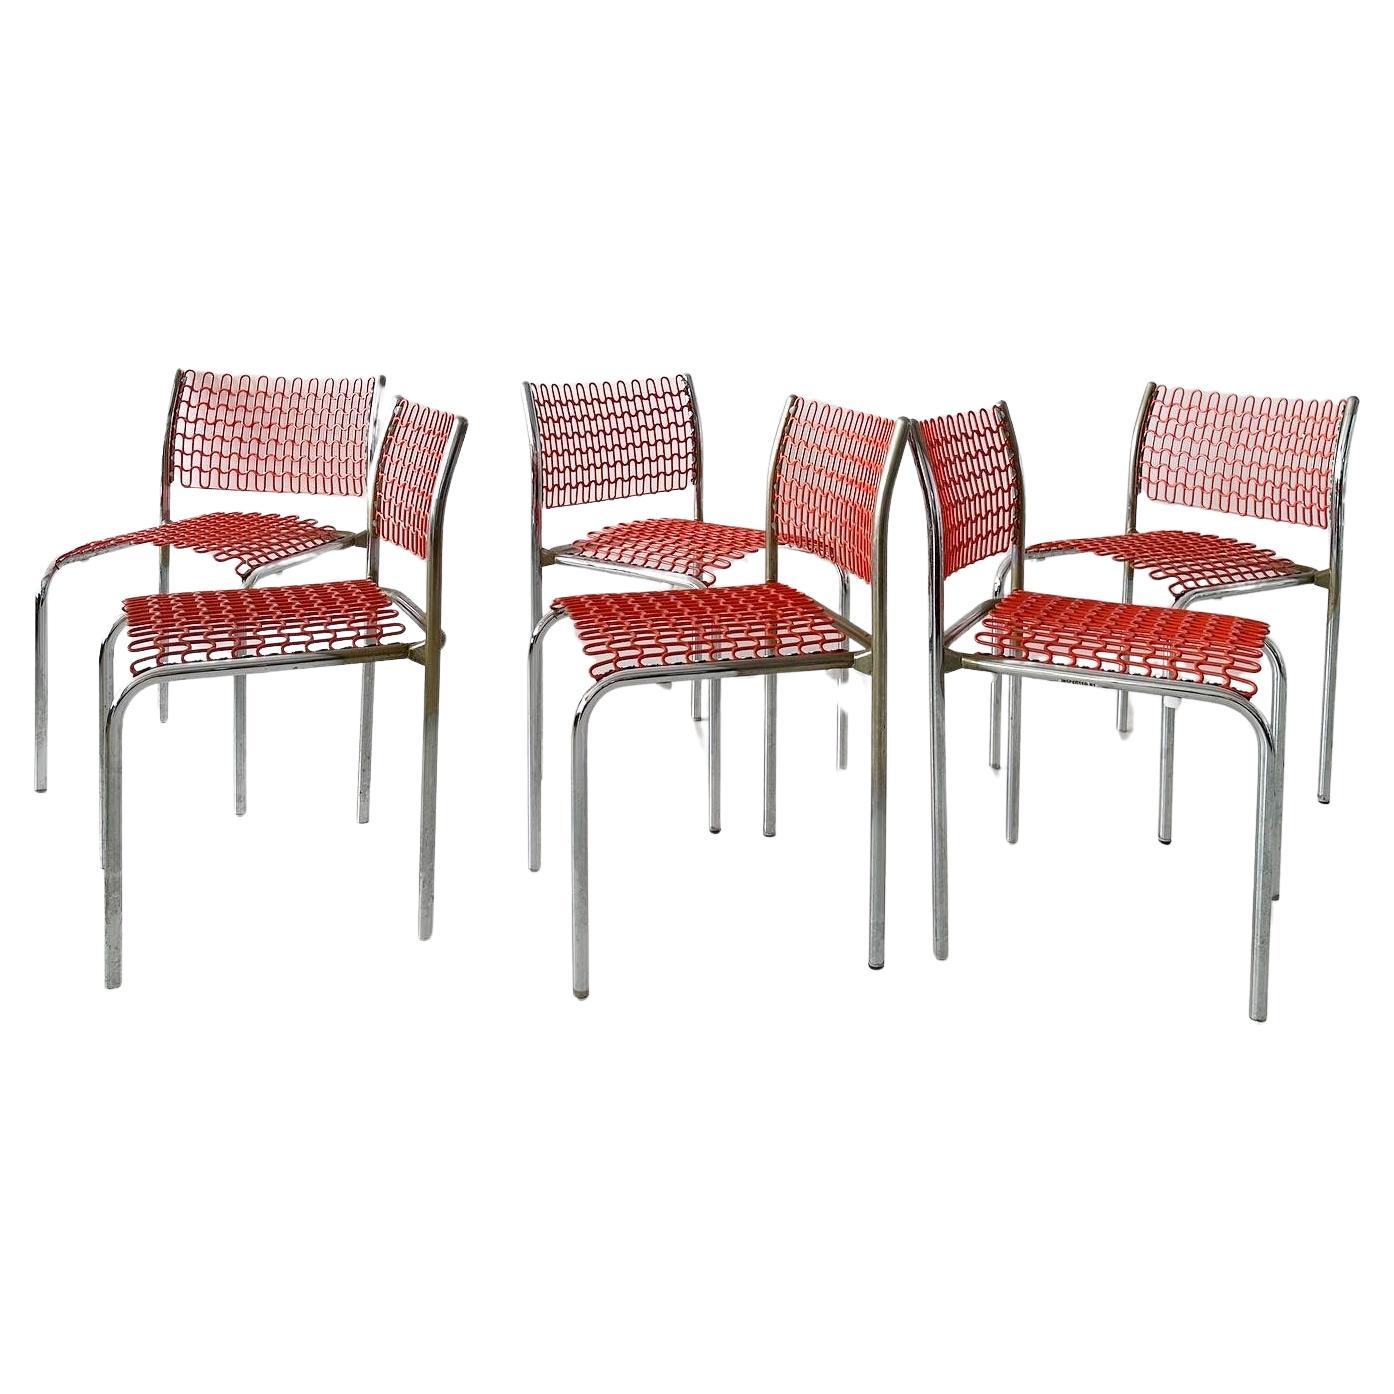 Orange Sof Tech Chairs by David Rowland for Thonet (set of 4) For Sale